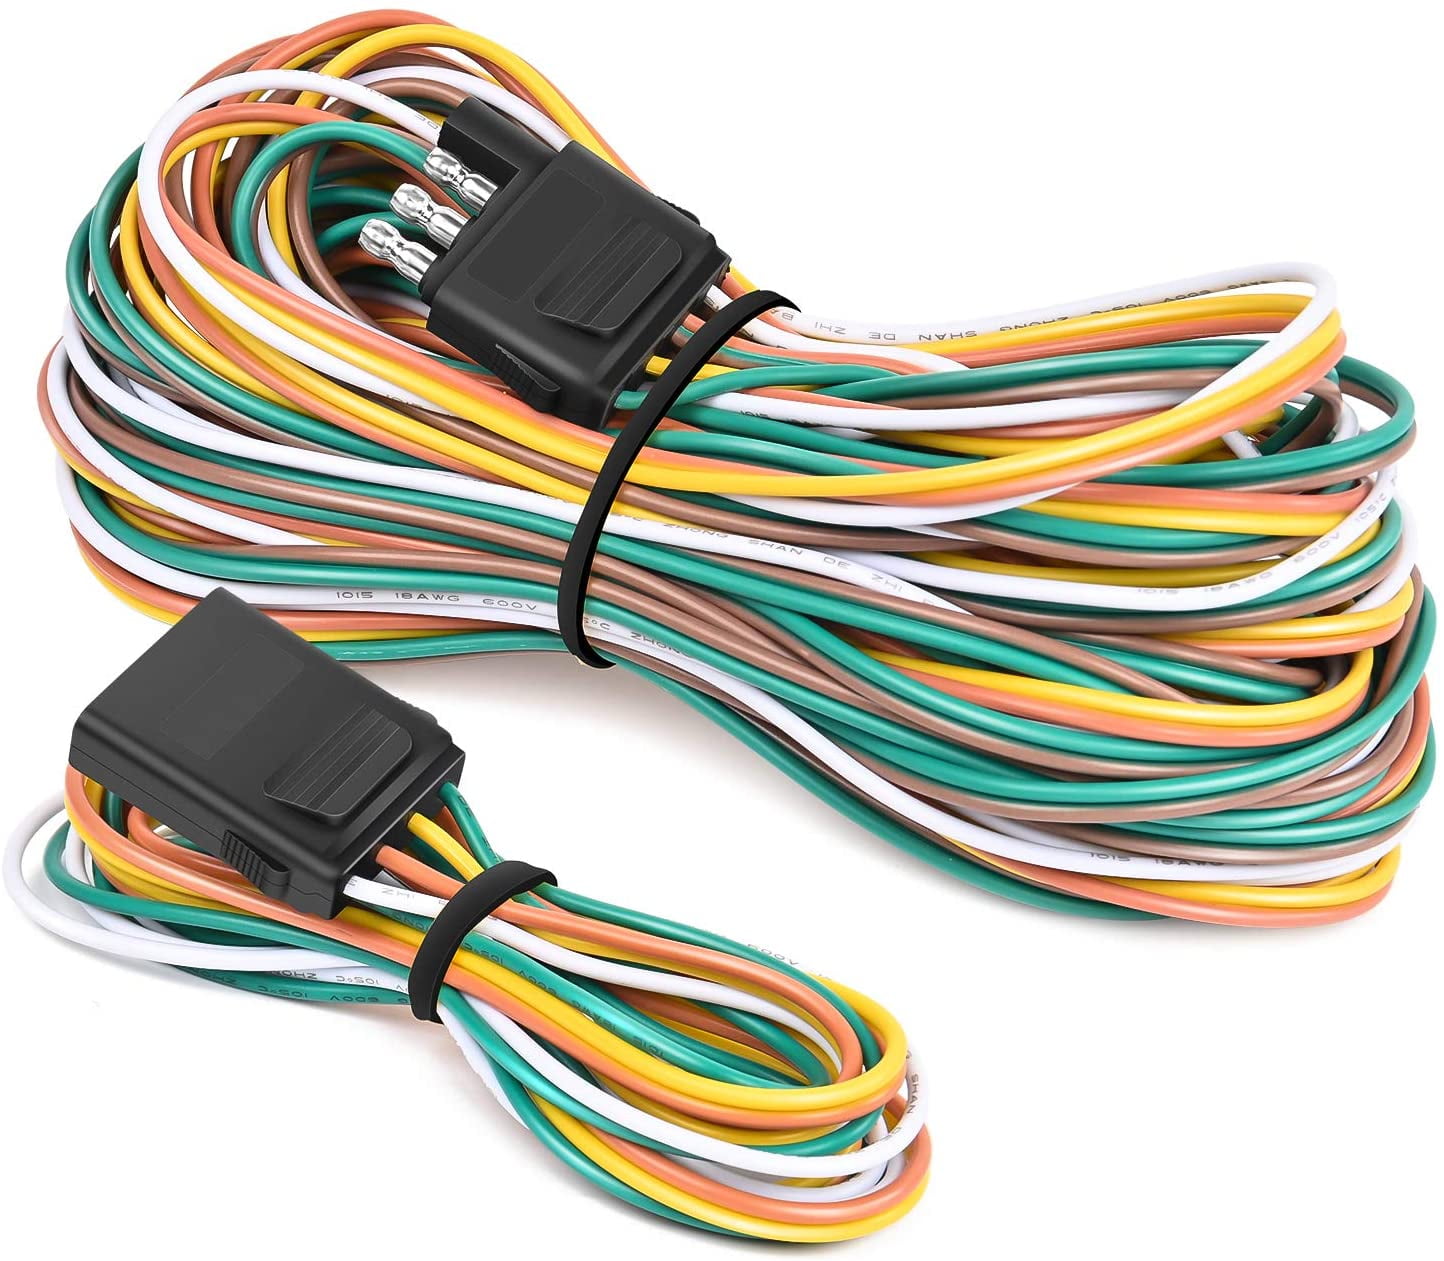 25Feet Male 4Feet Female Trailer Wire Trailer Harness for Utility Boat Trailer Lights VINAUO 25ft Trailer Wiring Harness Kit 4 Wire 18 AWG Color Coded Trailer Light Wire with 4 Way Flat Plug 